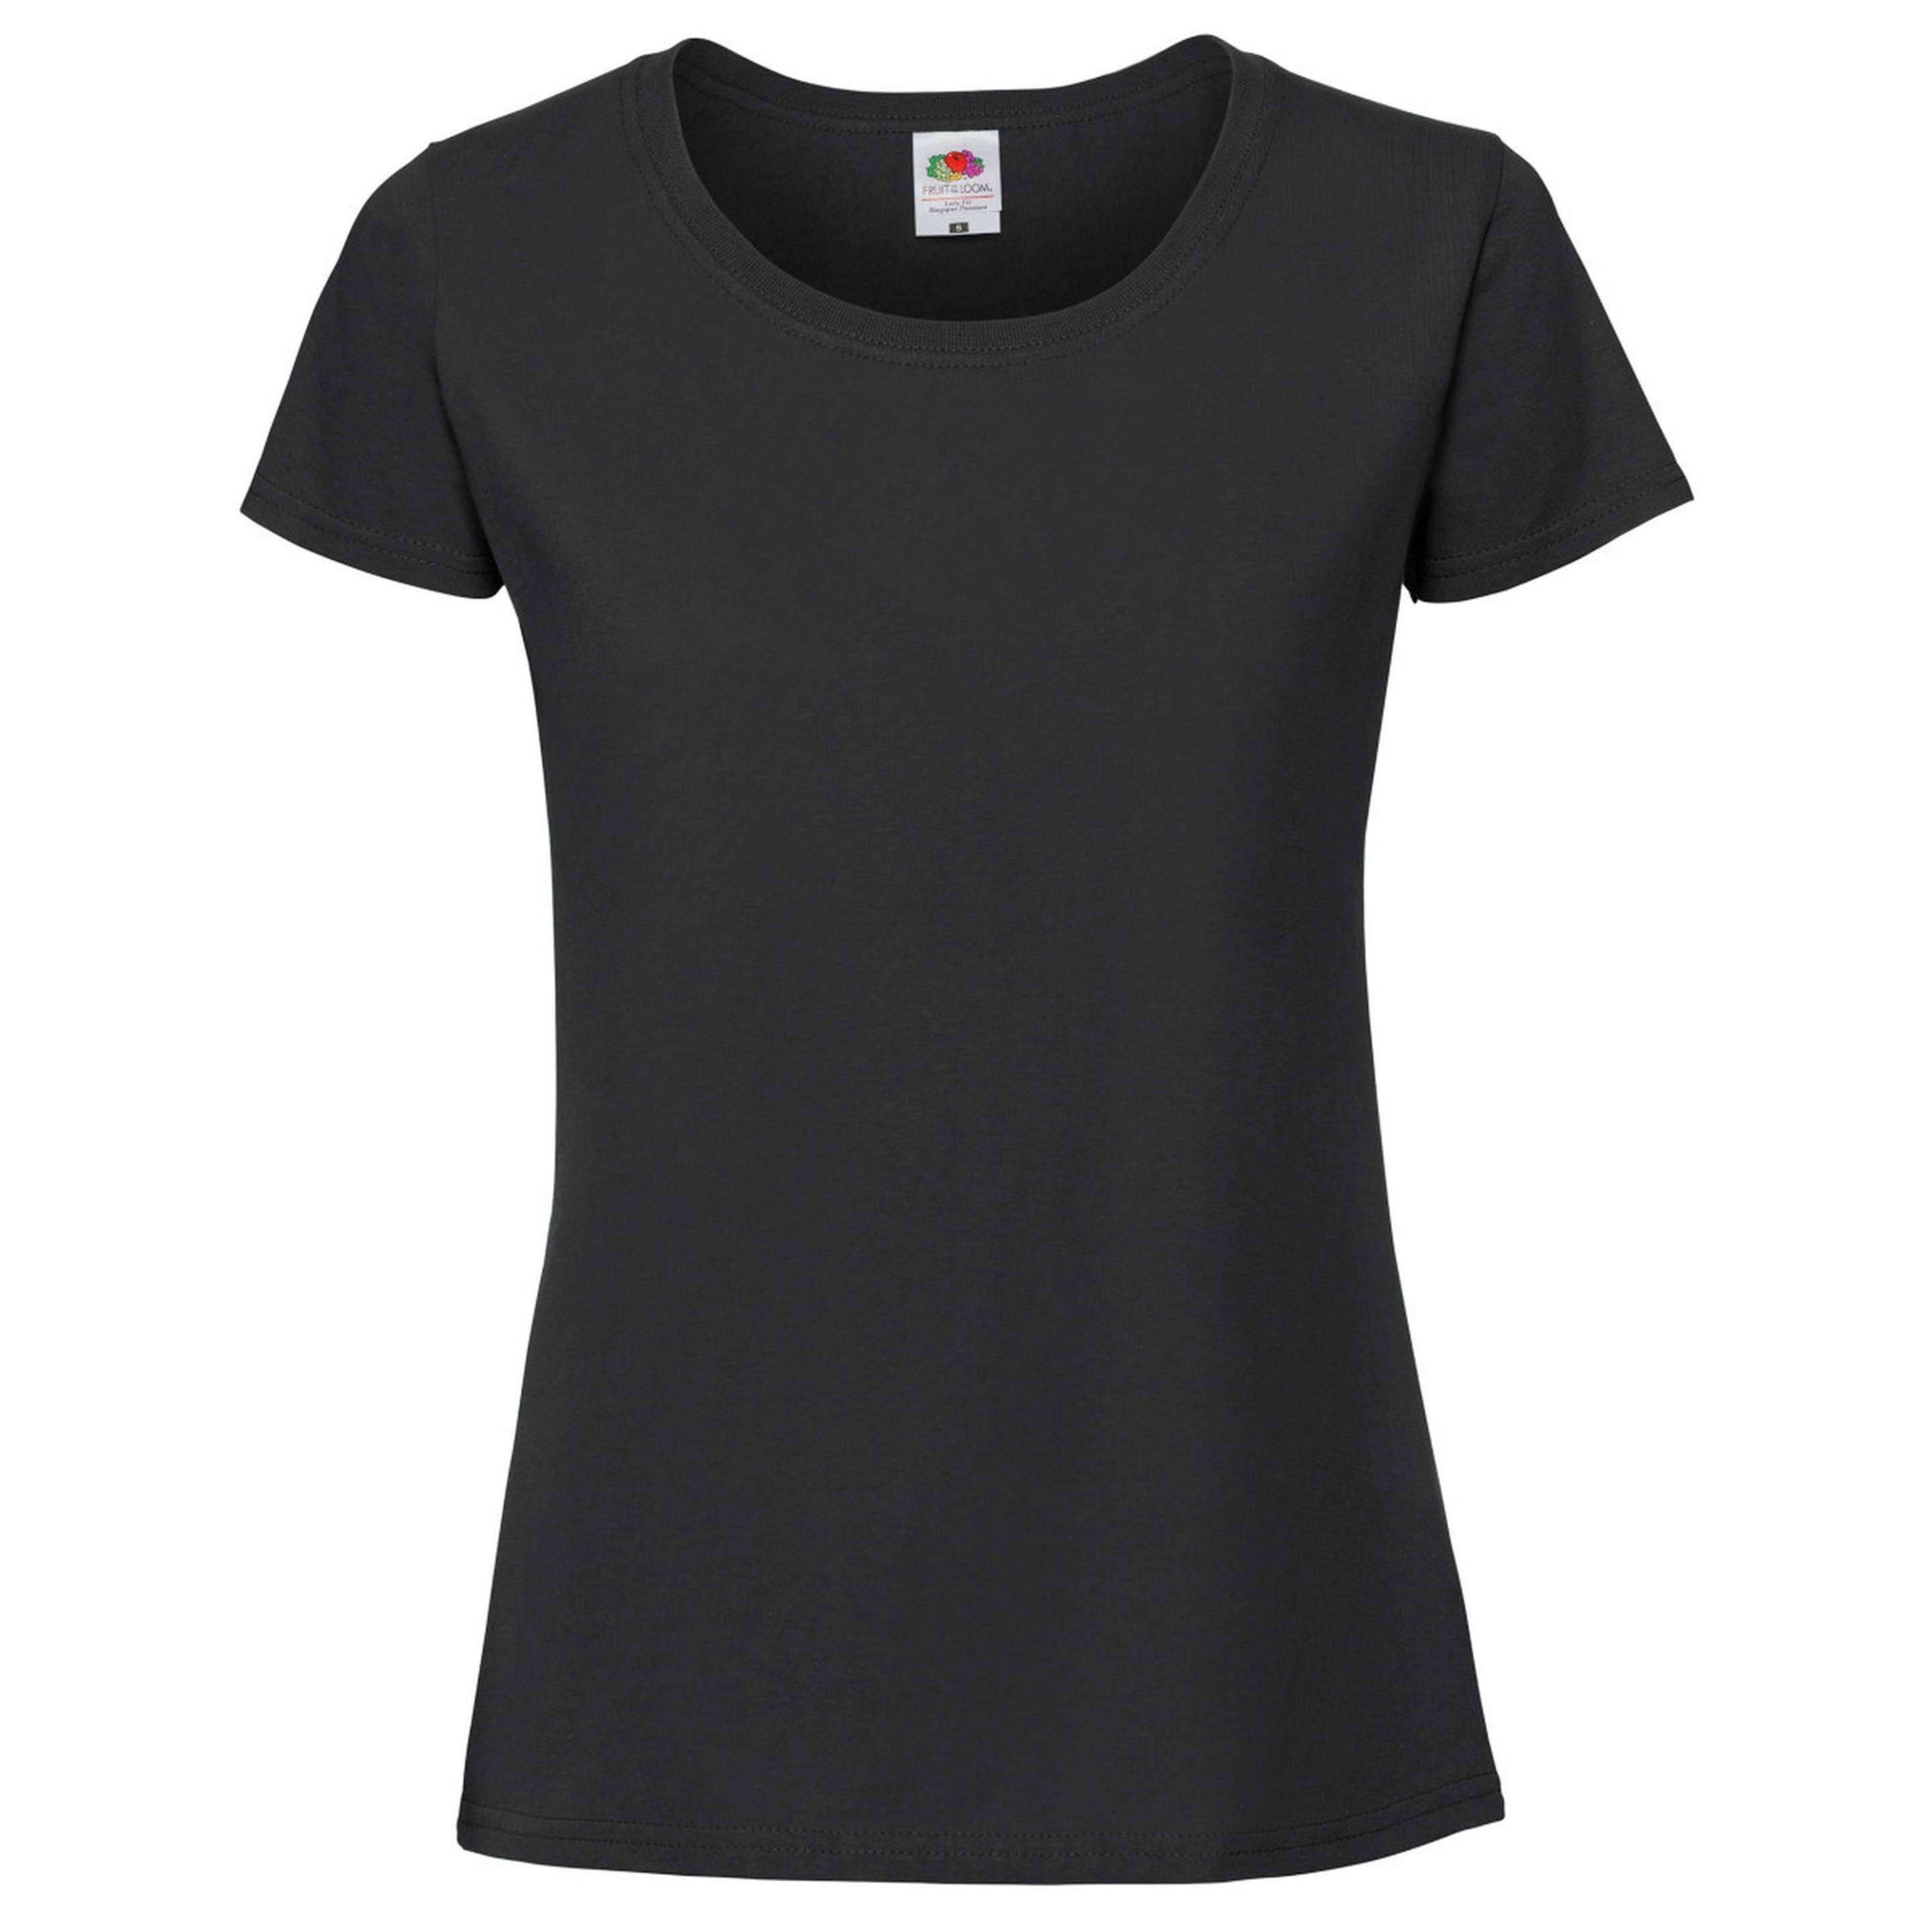 T-shirt Fruit Of The Loom - negro - 